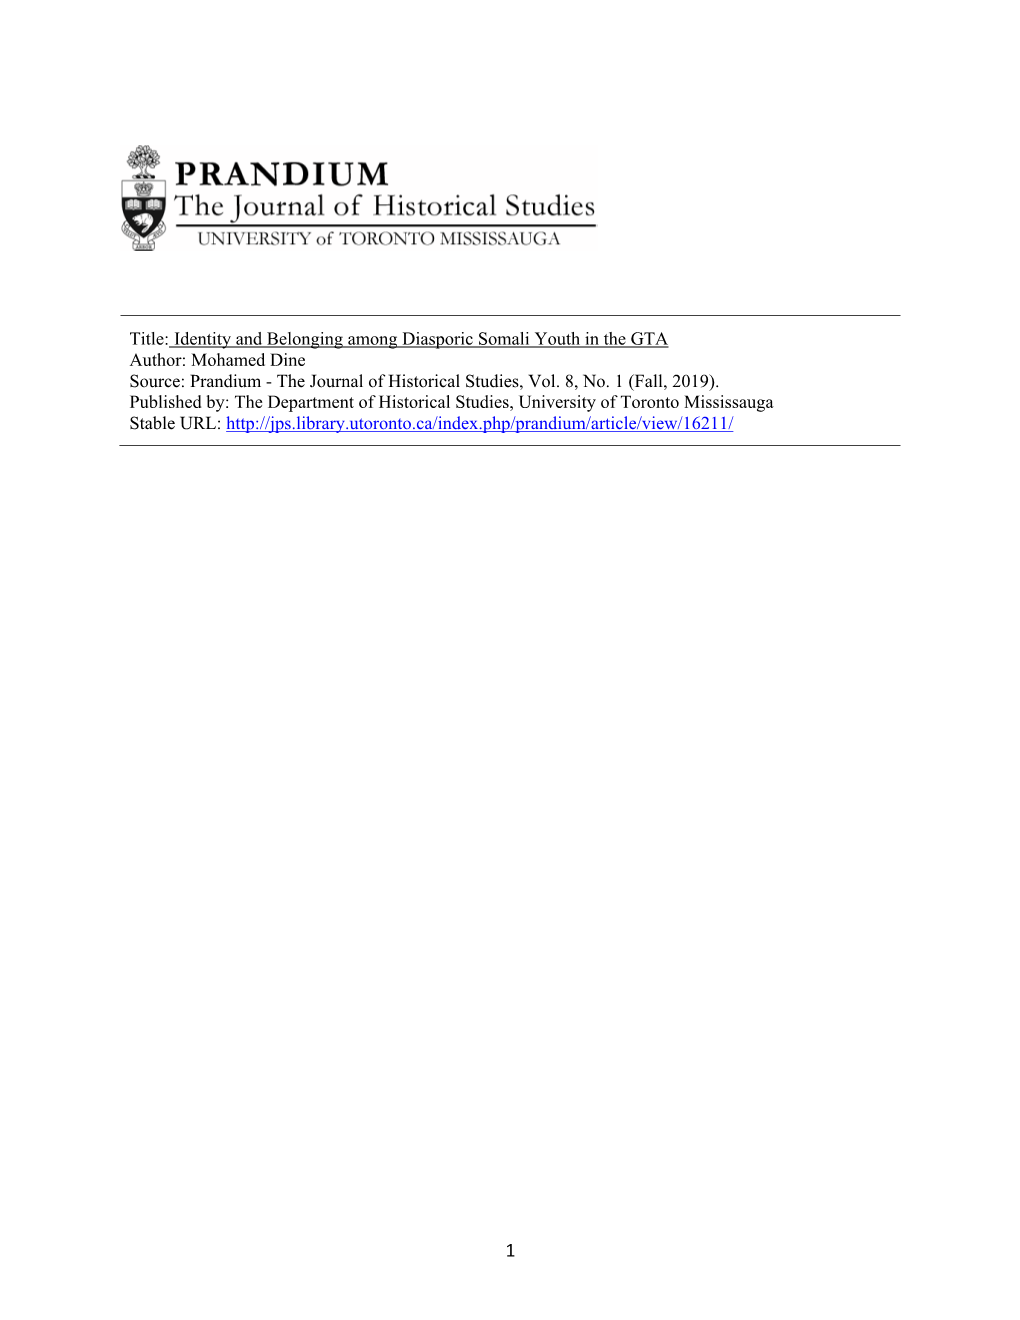 Title: Identity and Belonging Among Diasporic Somali Youth in the GTA Author: Mohamed Dine Source: Prandium - the Journal of Historical Studies, Vol